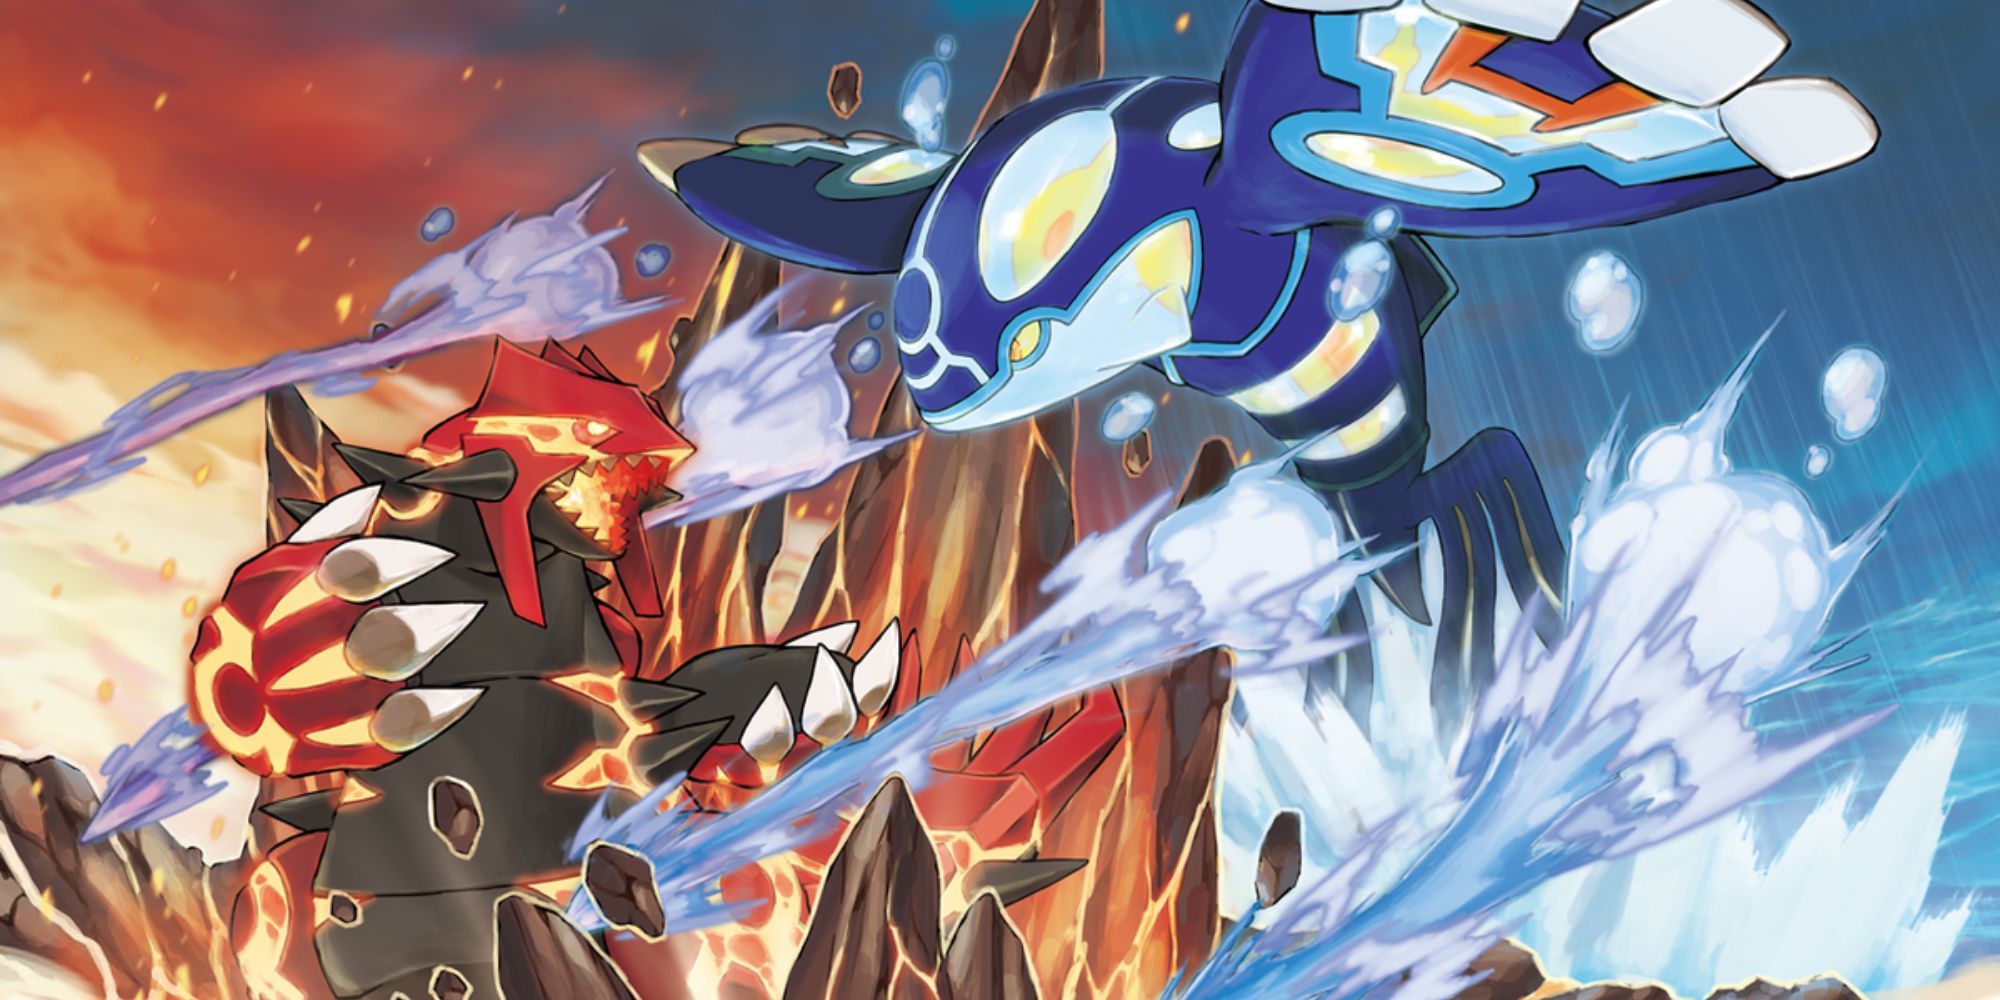 Official promotional art of Groudon and Kyogre in their Primal Forms.